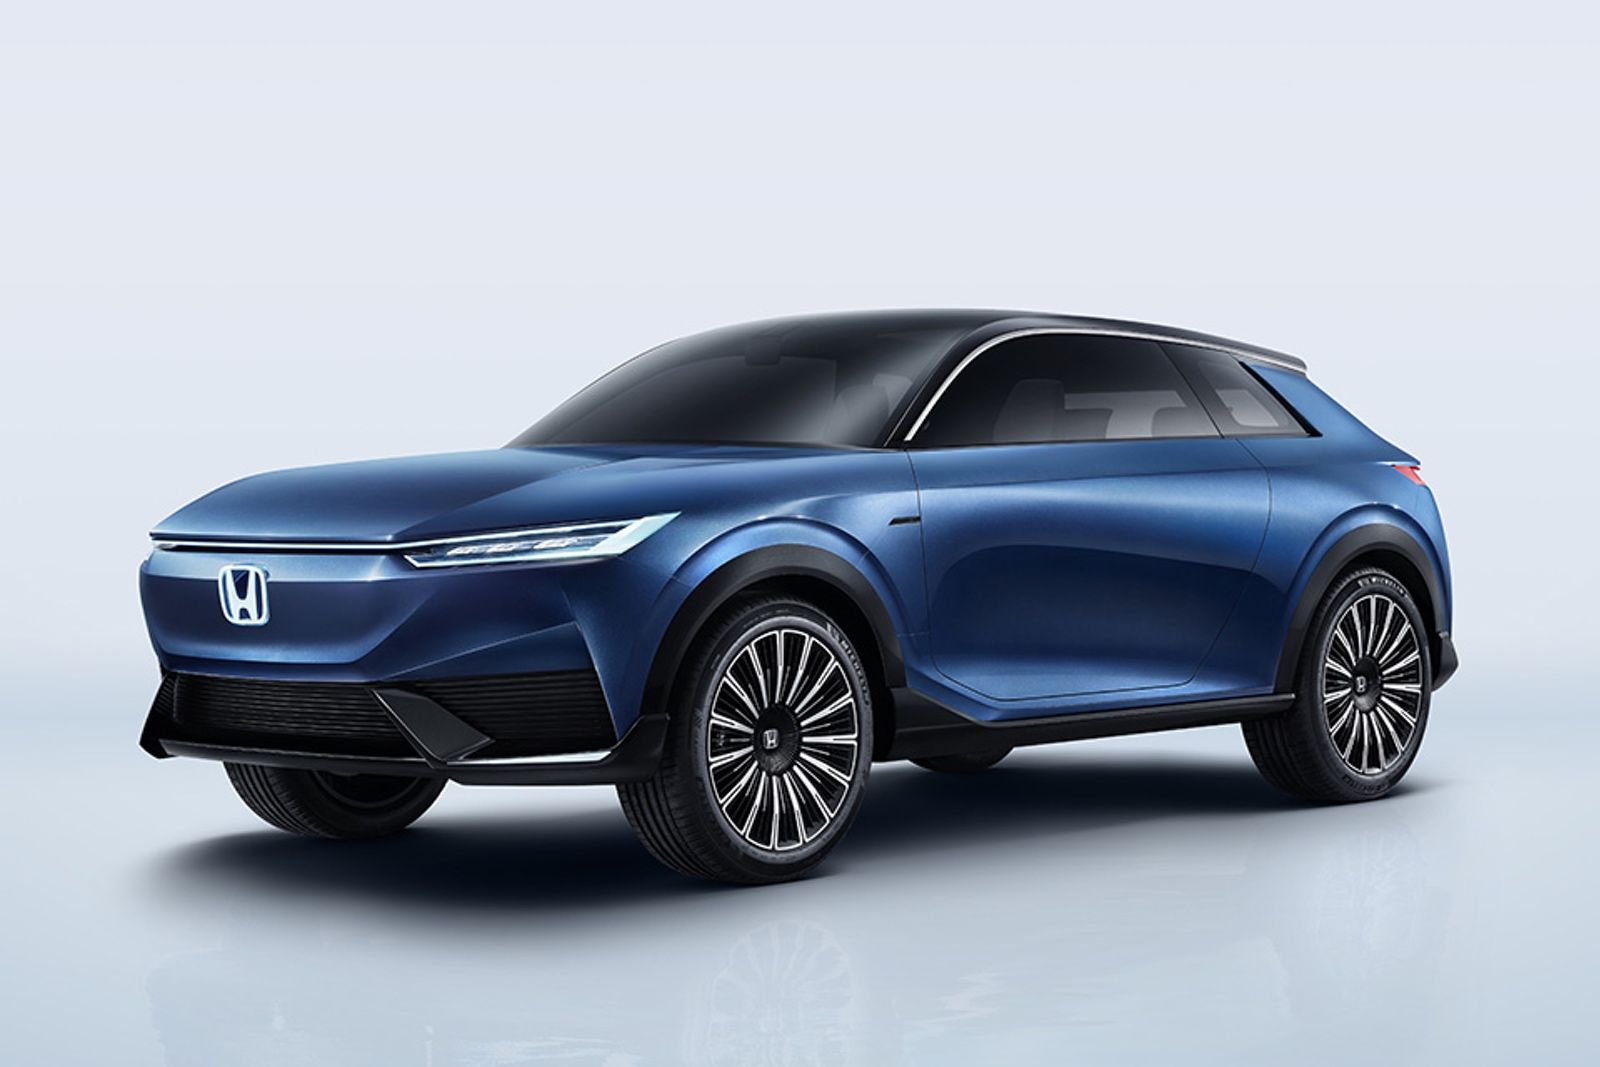 Honda shows off two-door electric SUV concept photo 1